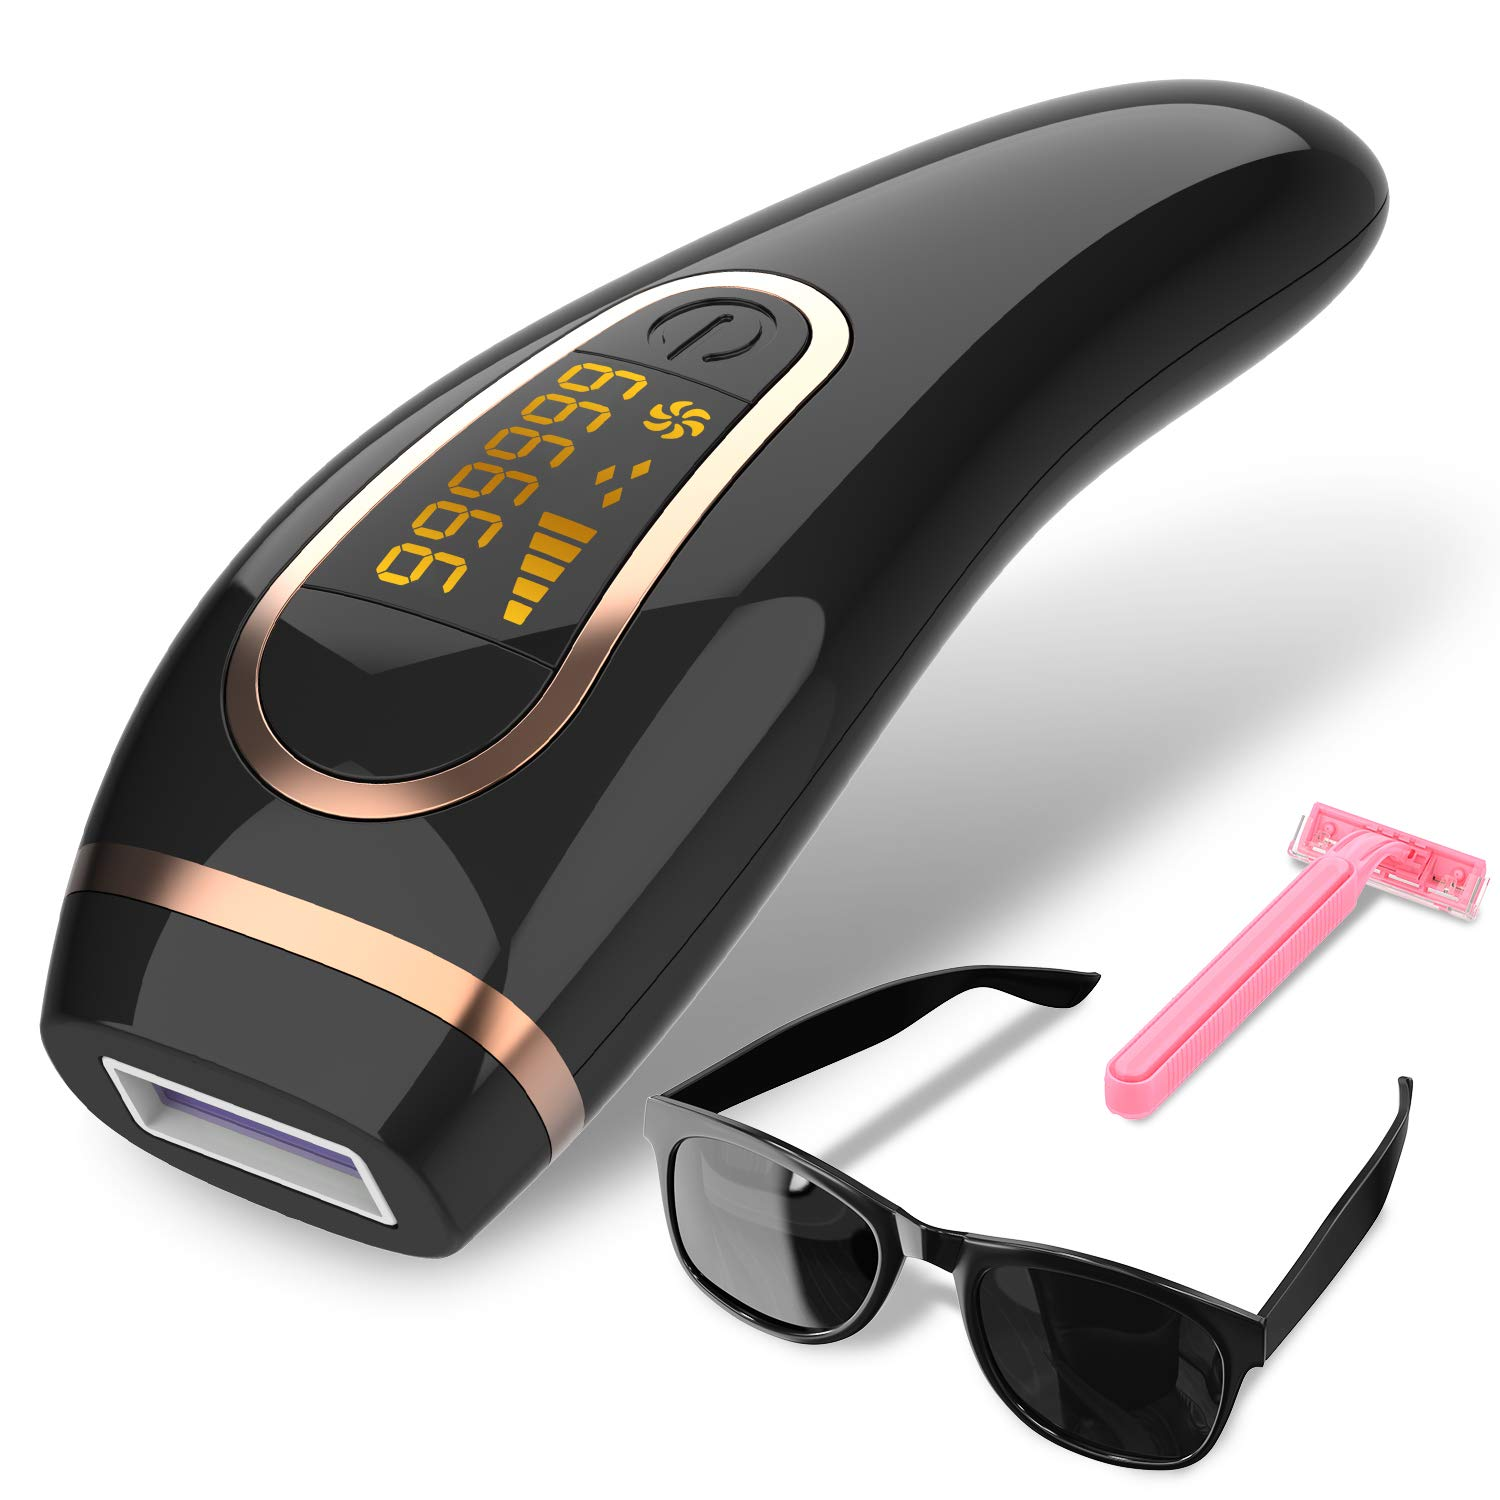 IPL Hair Removal Laser Hair Removal 999999 Flashes Painless Permanent Hair Remover for Face, Body,Legs,Arms,Armpits,At-Home Use(Black) - image 1 of 7